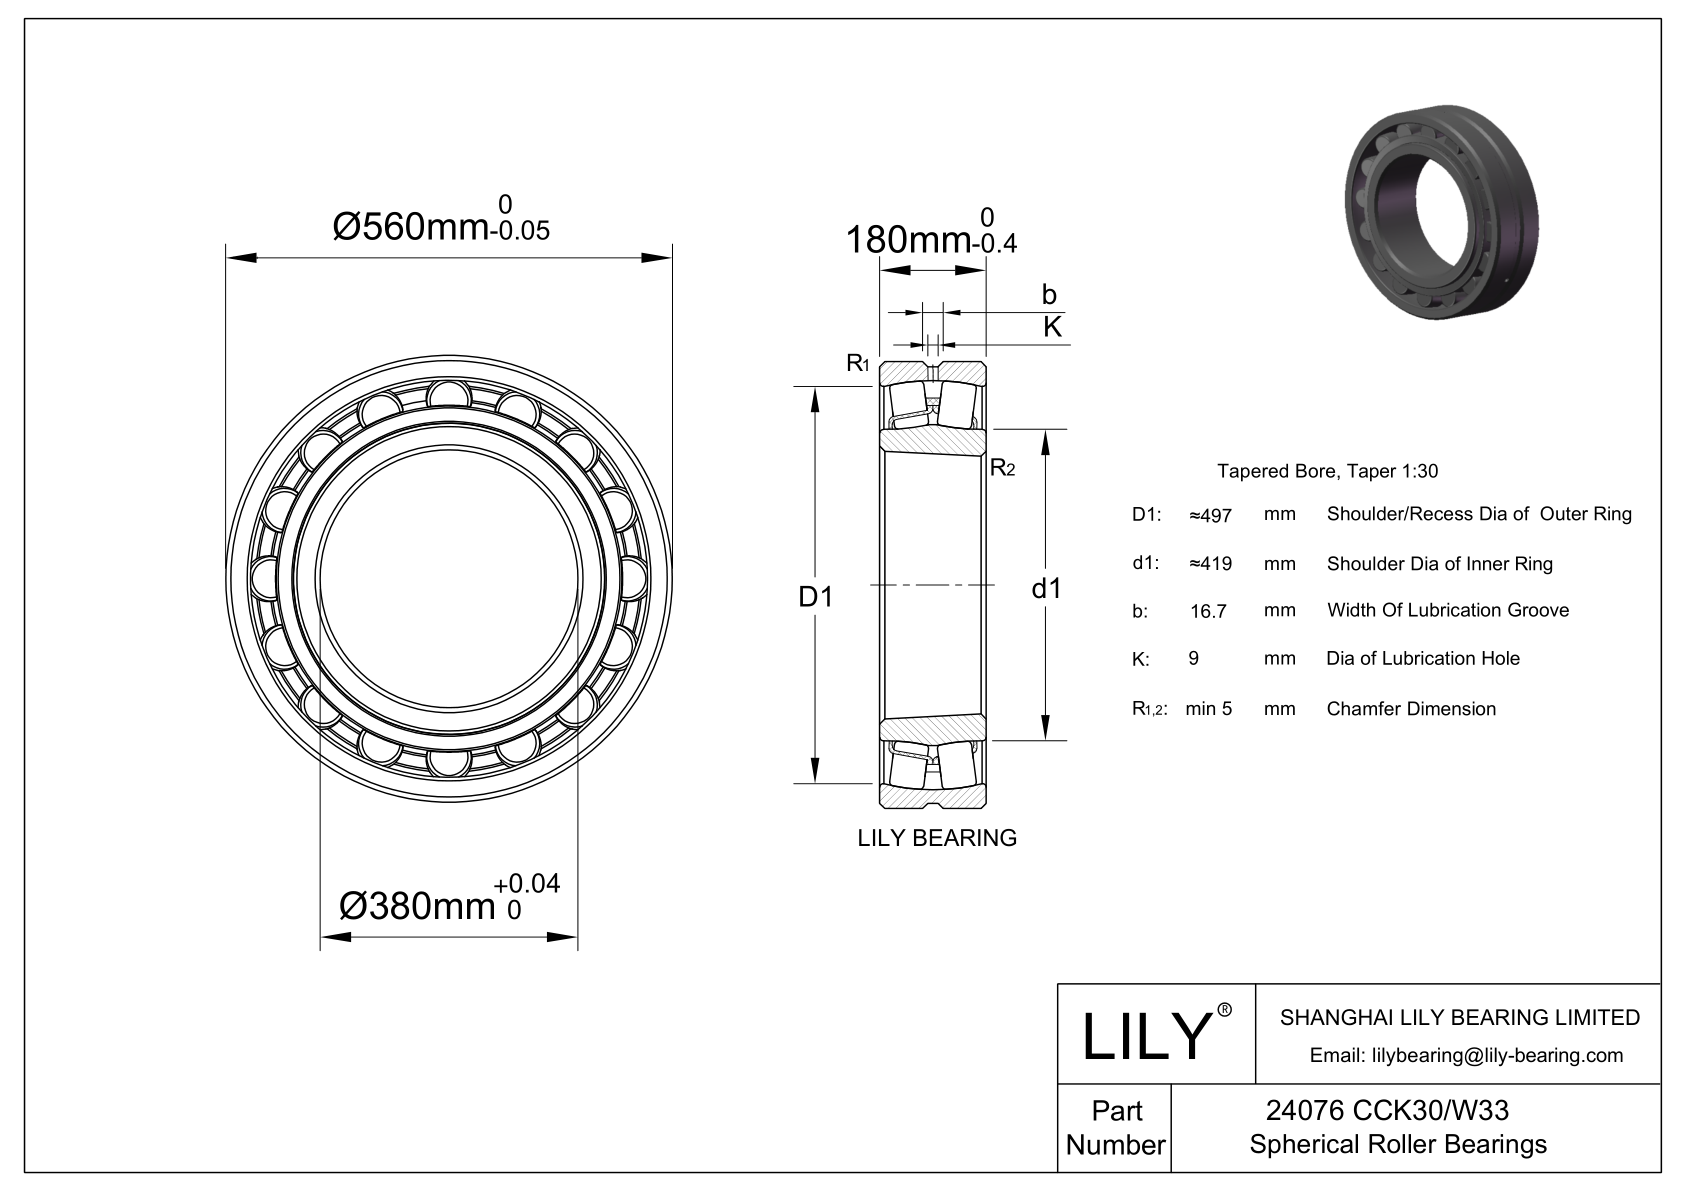 24076 CCK30/W33 Double Row Spherical Roller Bearing cad drawing